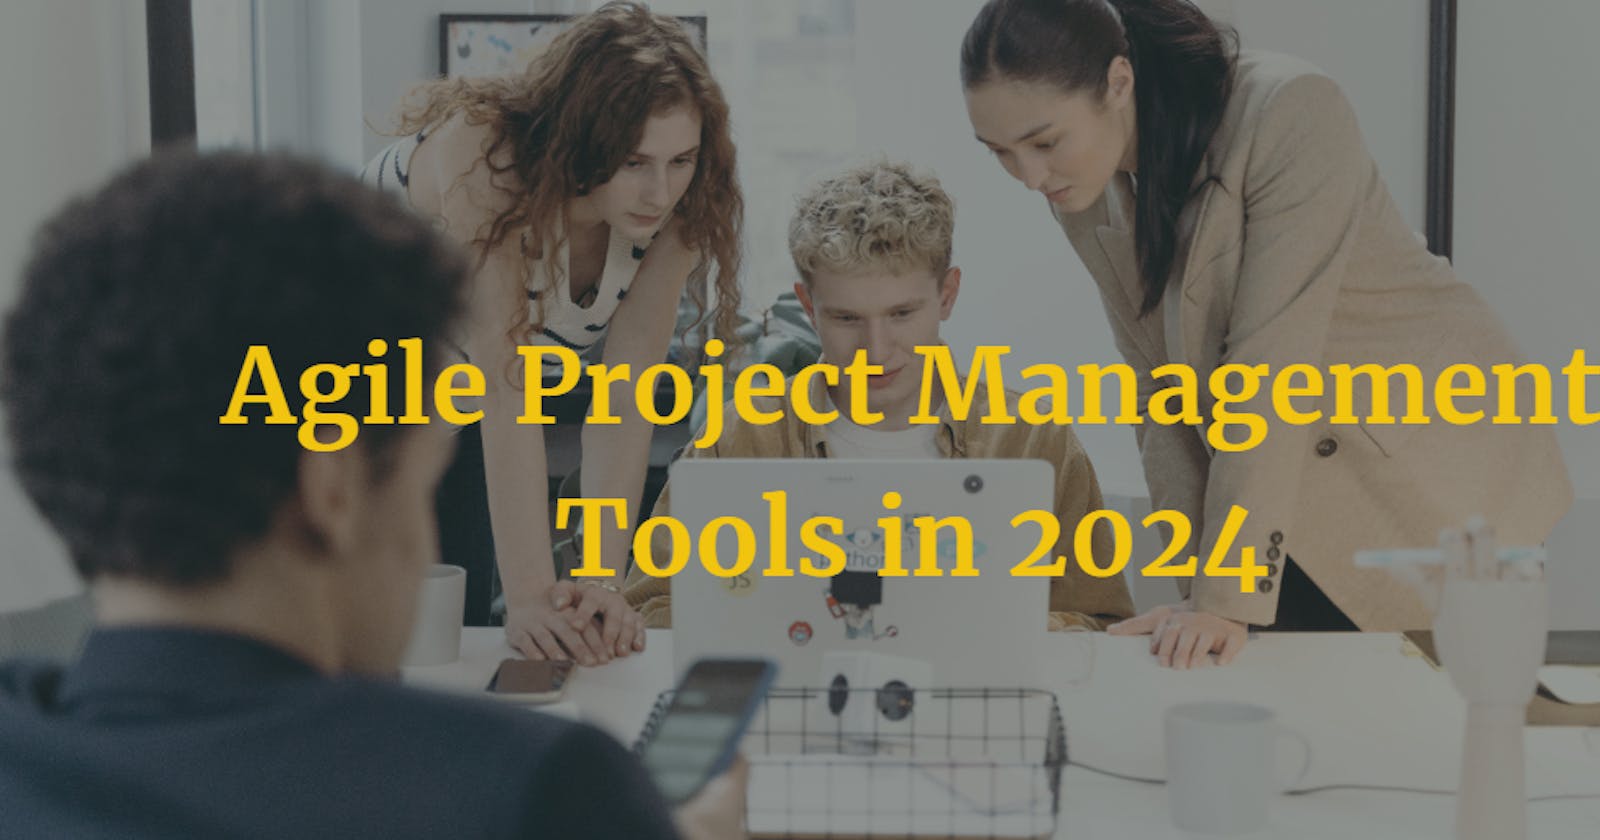 Top 10 Agile Project Management Tools in 2024